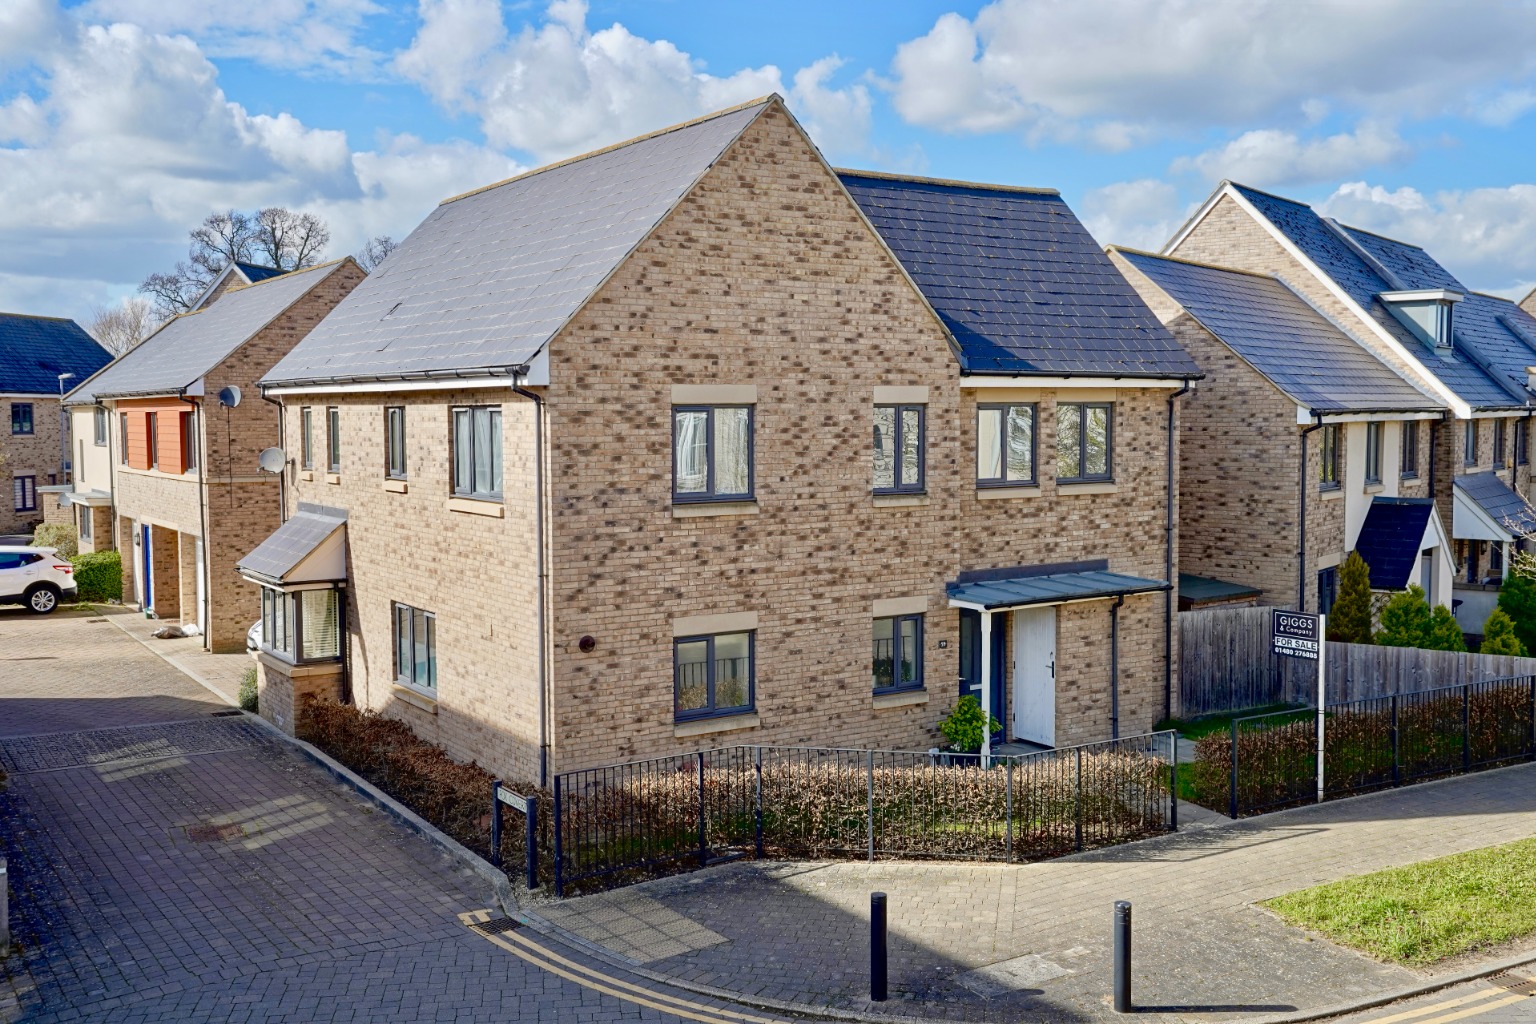 4 bed  for sale in Stone Hill, St. Neots, PE19